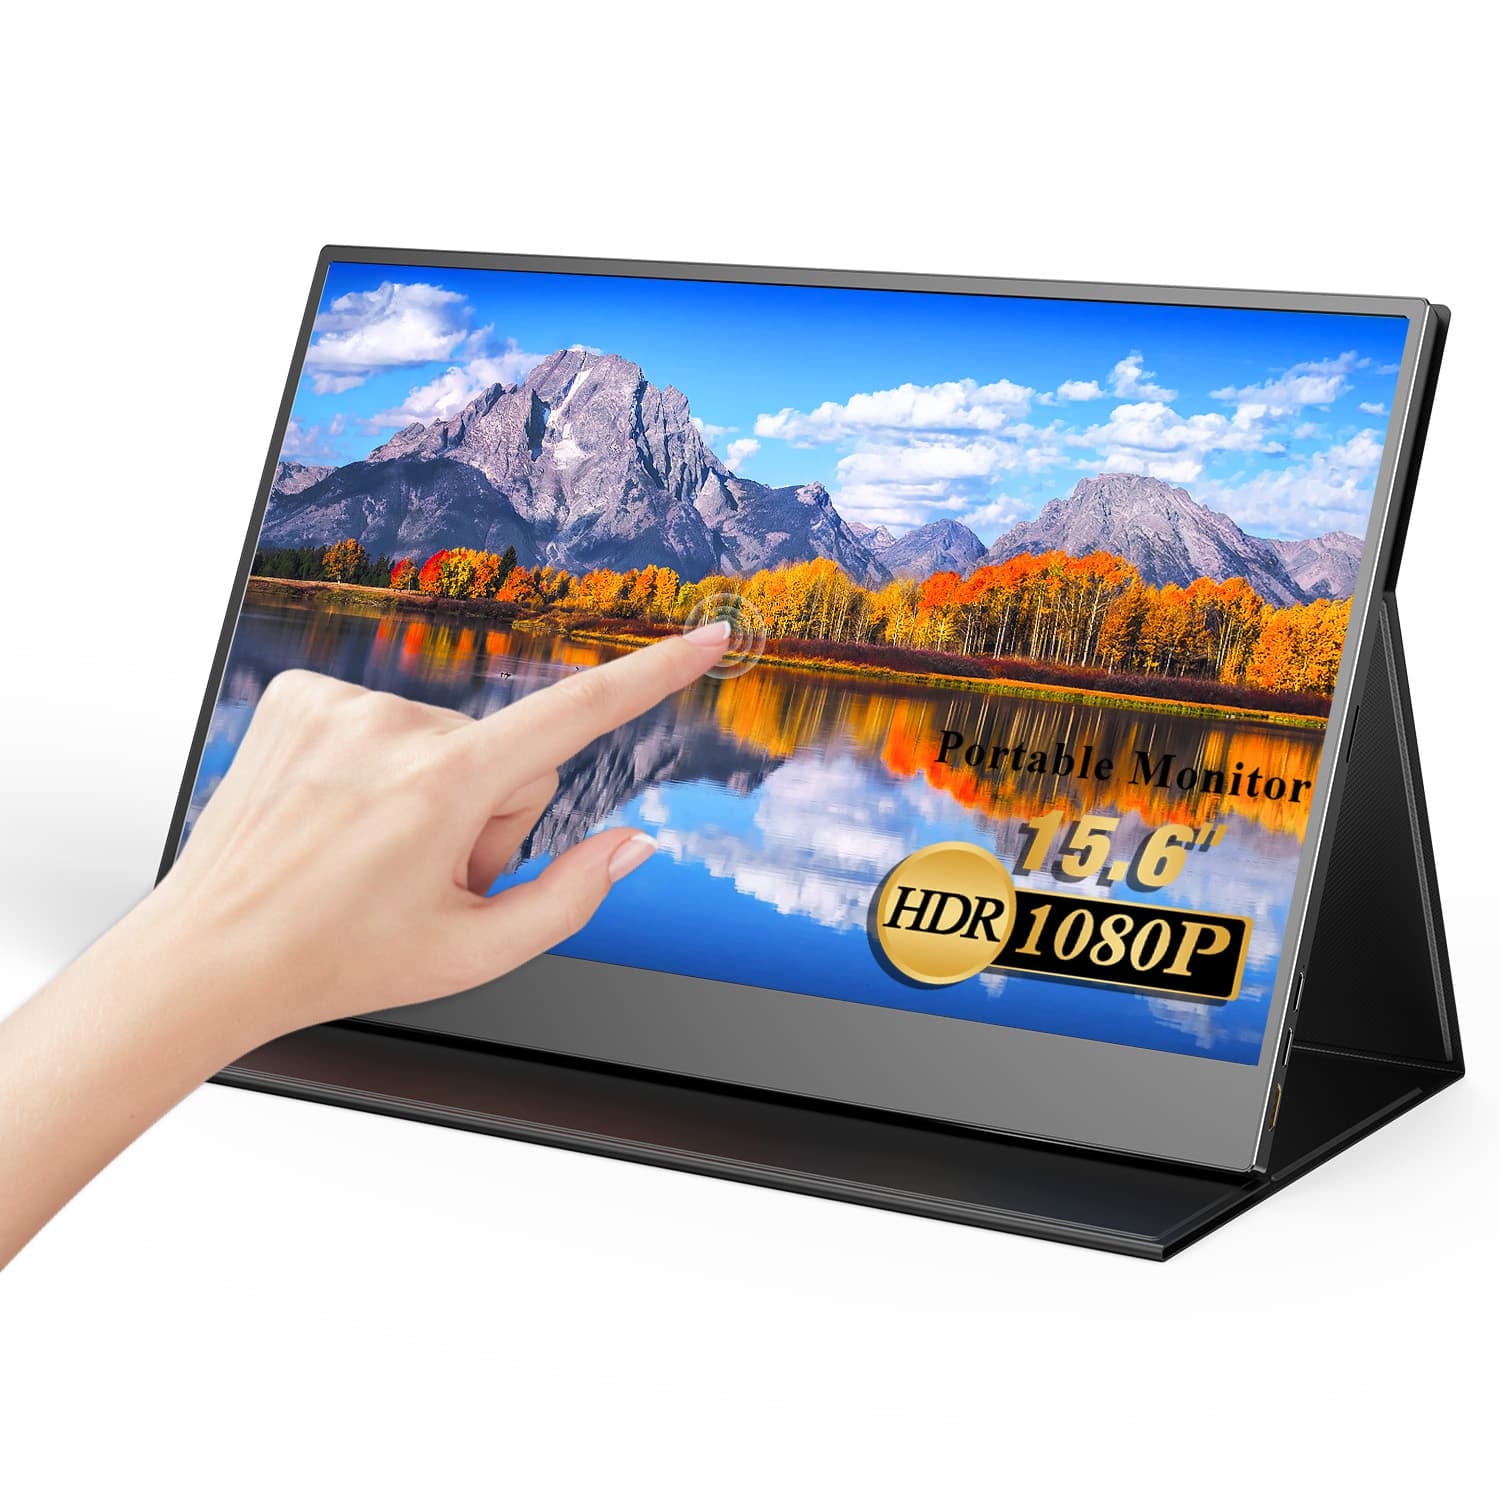 Portable Monitor Touch Screen, UPERFECT 15.6 Inch 1080P FHD IPS HDR Computer Display HDMI USB-C External Laptop Screen, Touchscreen Monitor With Smart Case for laptop